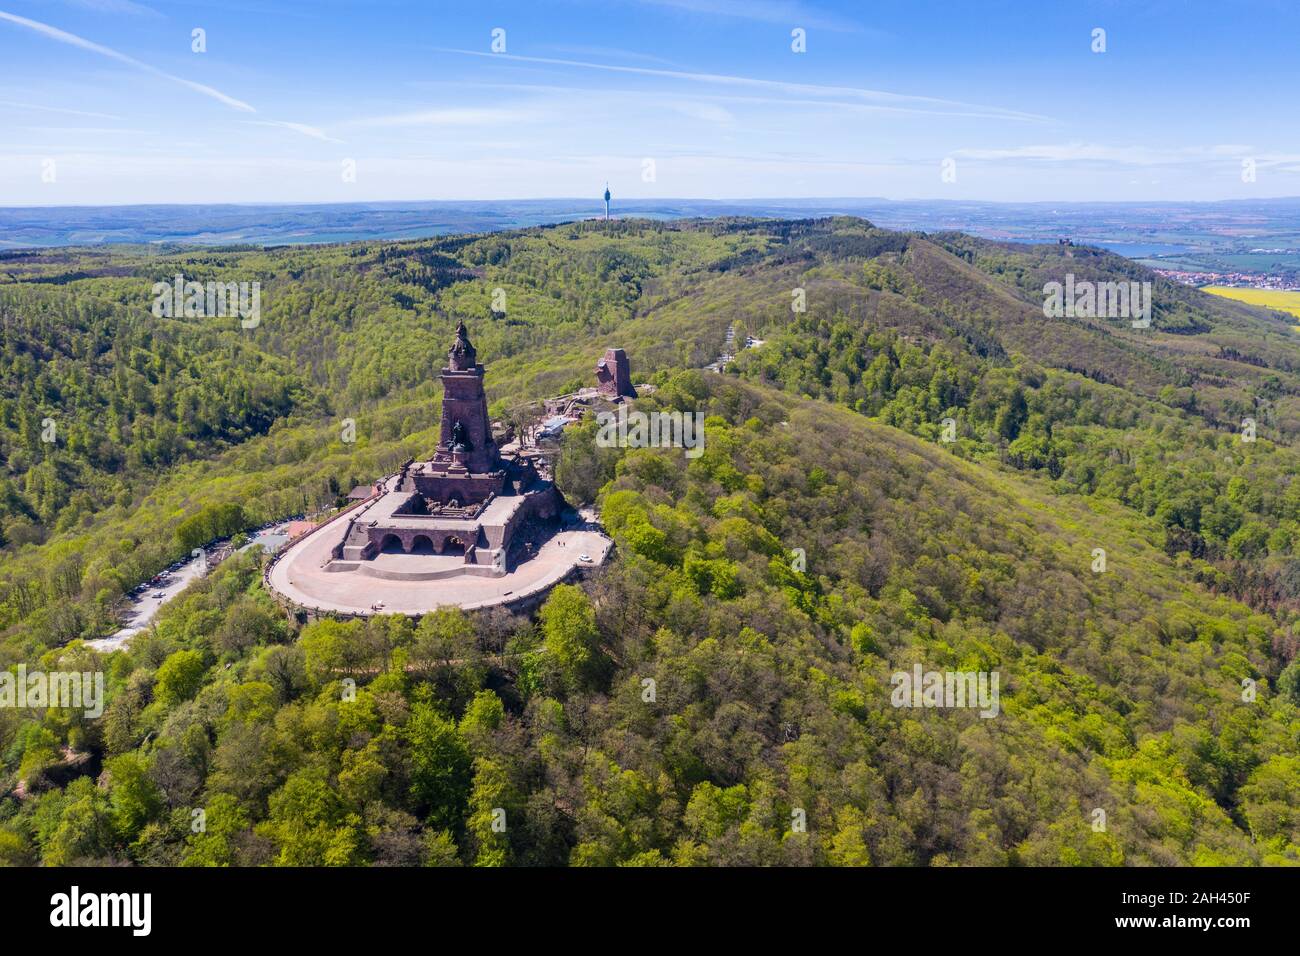 Germany, Thuringia, Aerial view of Kyffhaeuser Monument surrounded by green forest Stock Photo